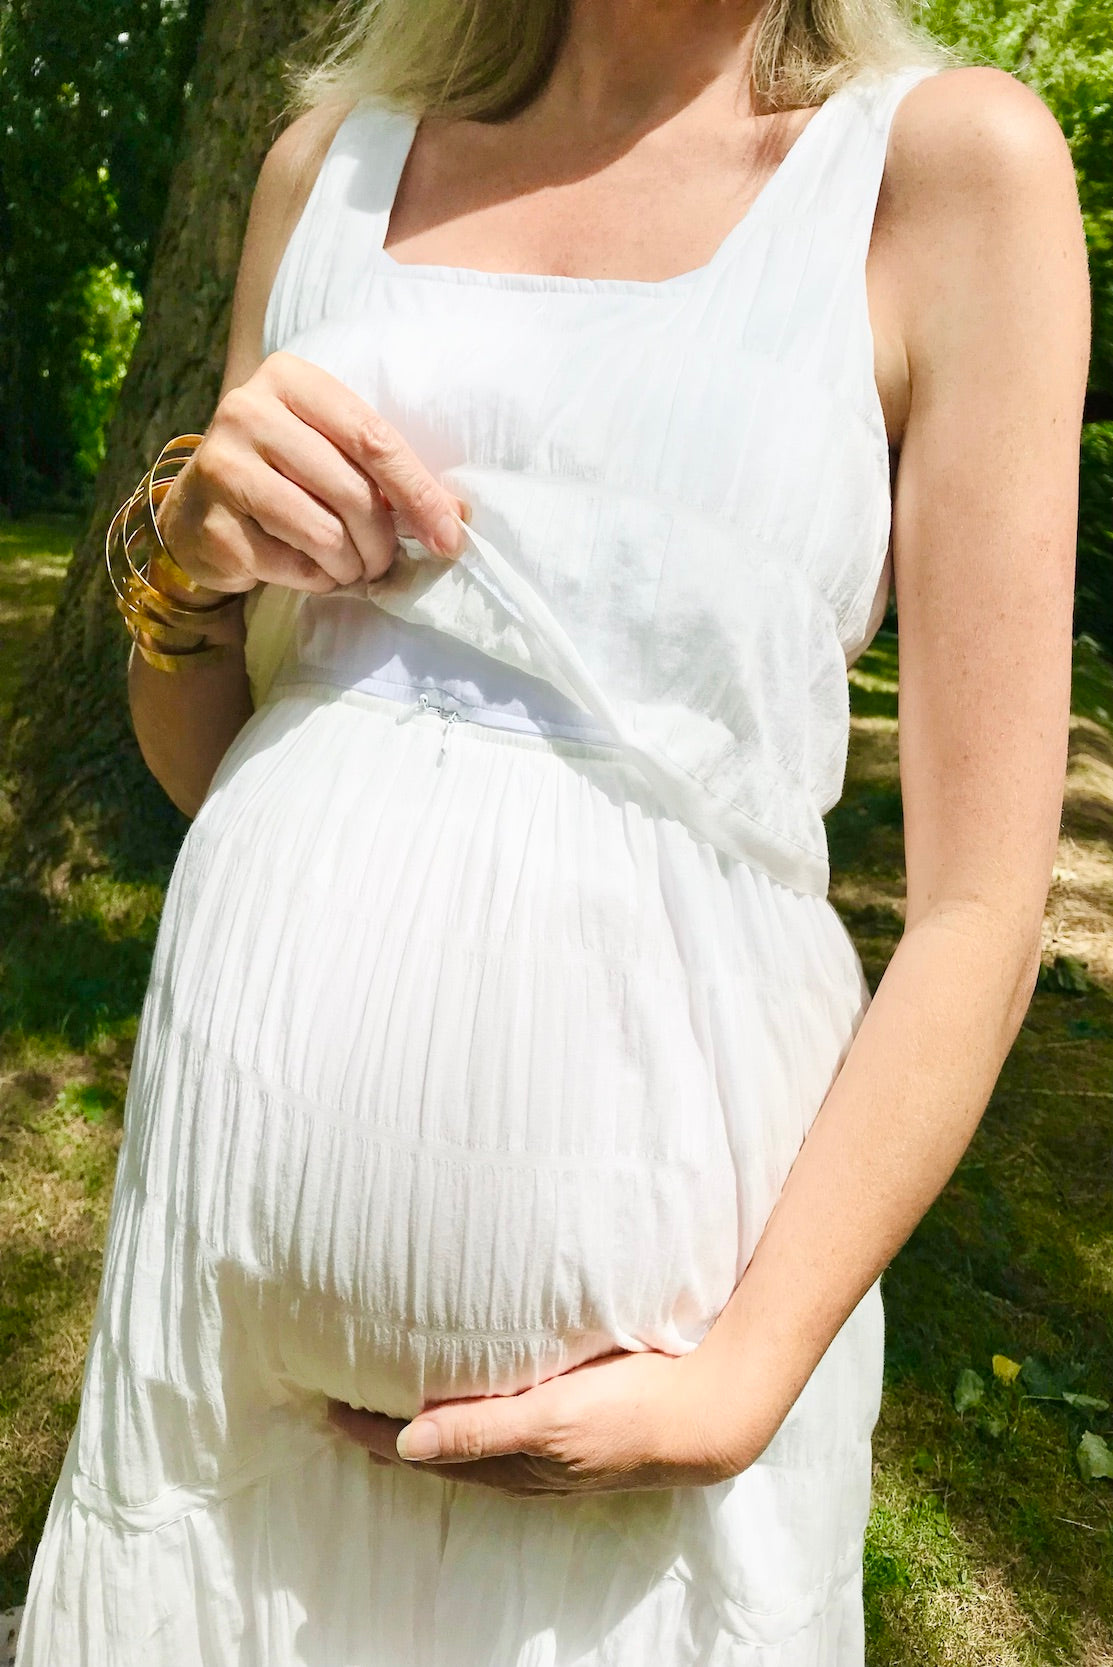 CARI's Bump-to-Baby white maternity and breastfeeding sundress is a summer essential for any maternity wardrobe. A contemporary tiered maxi design accommodates a nine-month bump. Concealed zips deliver convenient breastfeeding access and a flattering loose fit postpartum. It's the dress that evolves along with you.